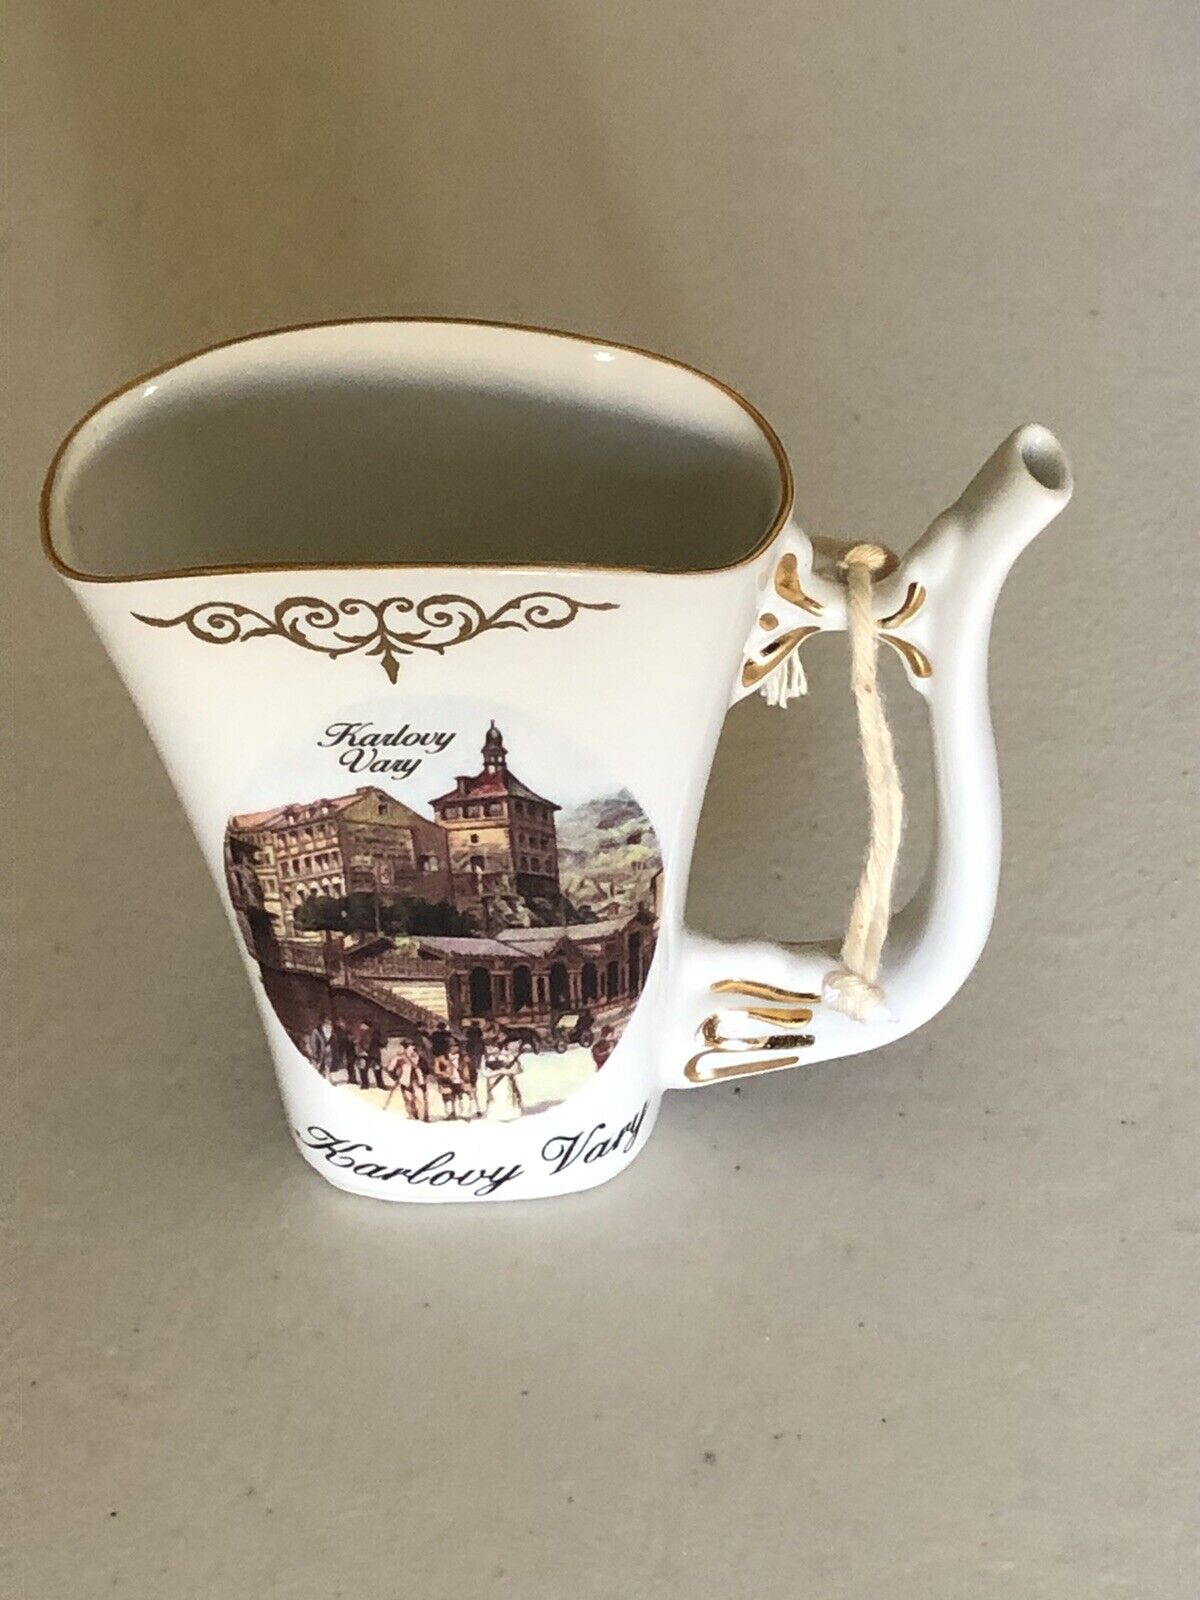 VTG KARLOVY VARY VIVA DALOVICE PORCELAIN MINERAL WATER SIPPING CUP 4\